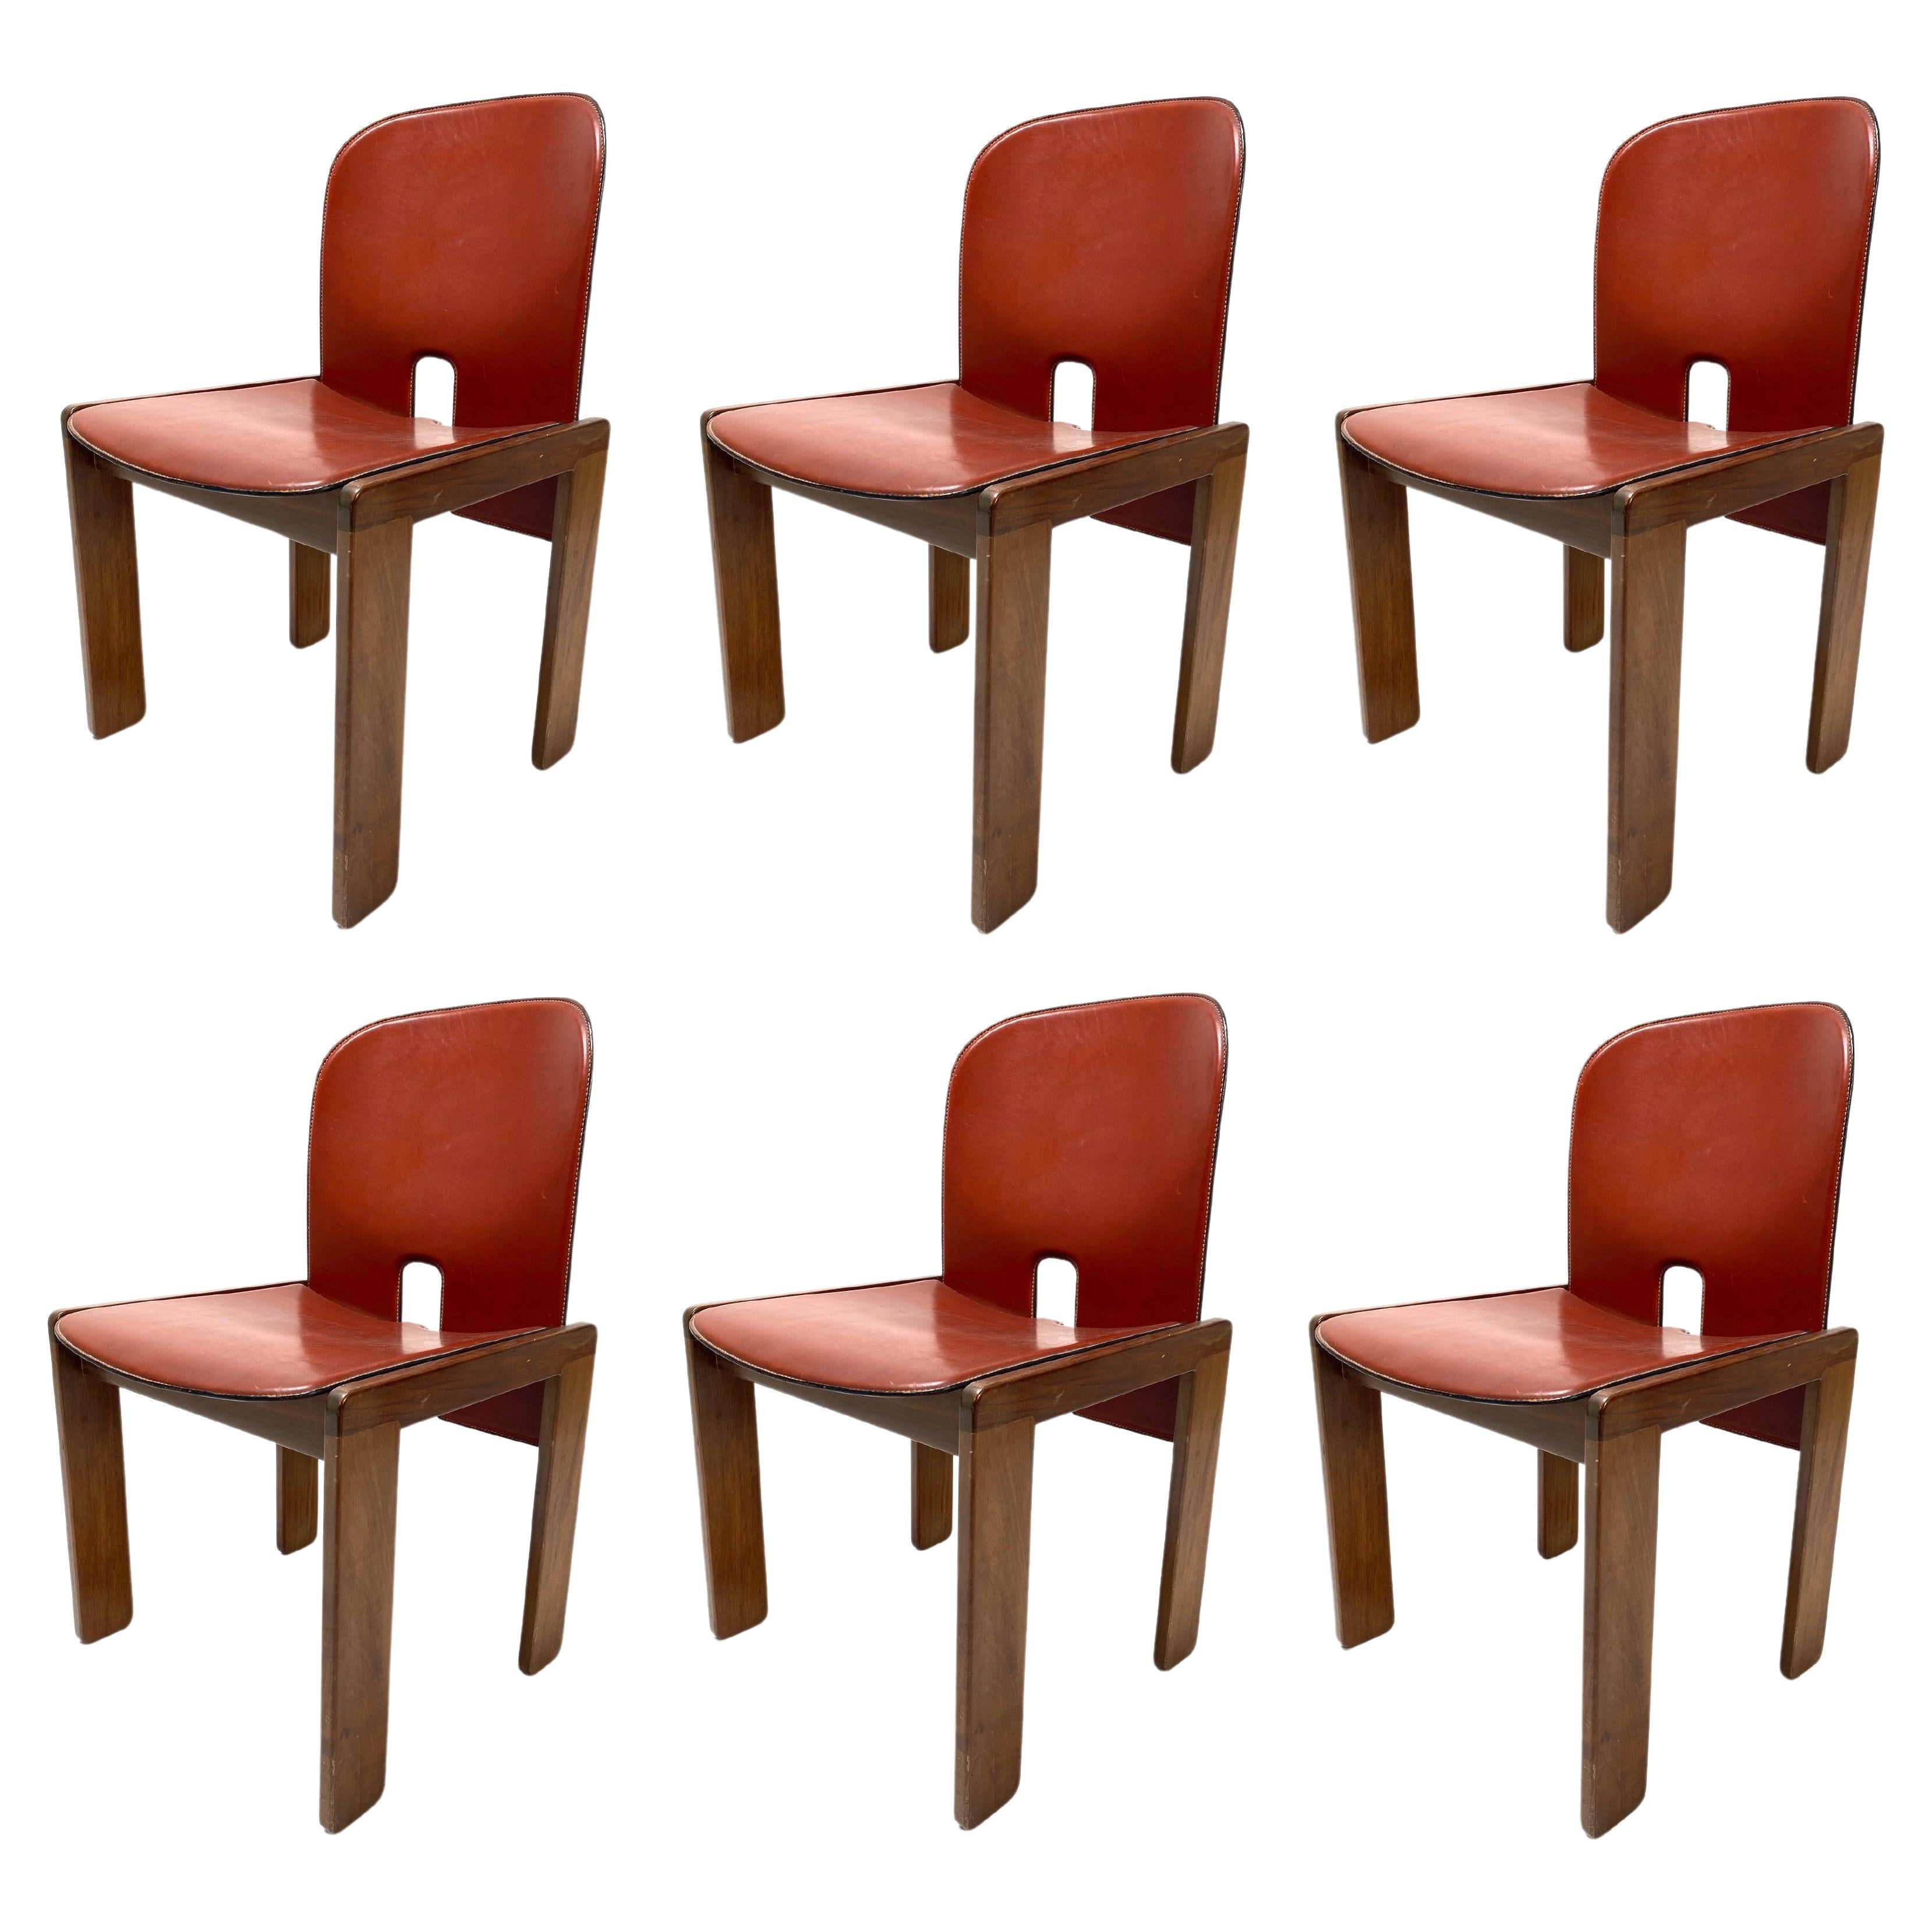 Set of 6 Leather "121" Chairs by Tobia Scarpa for Cassina, Italy, 1967